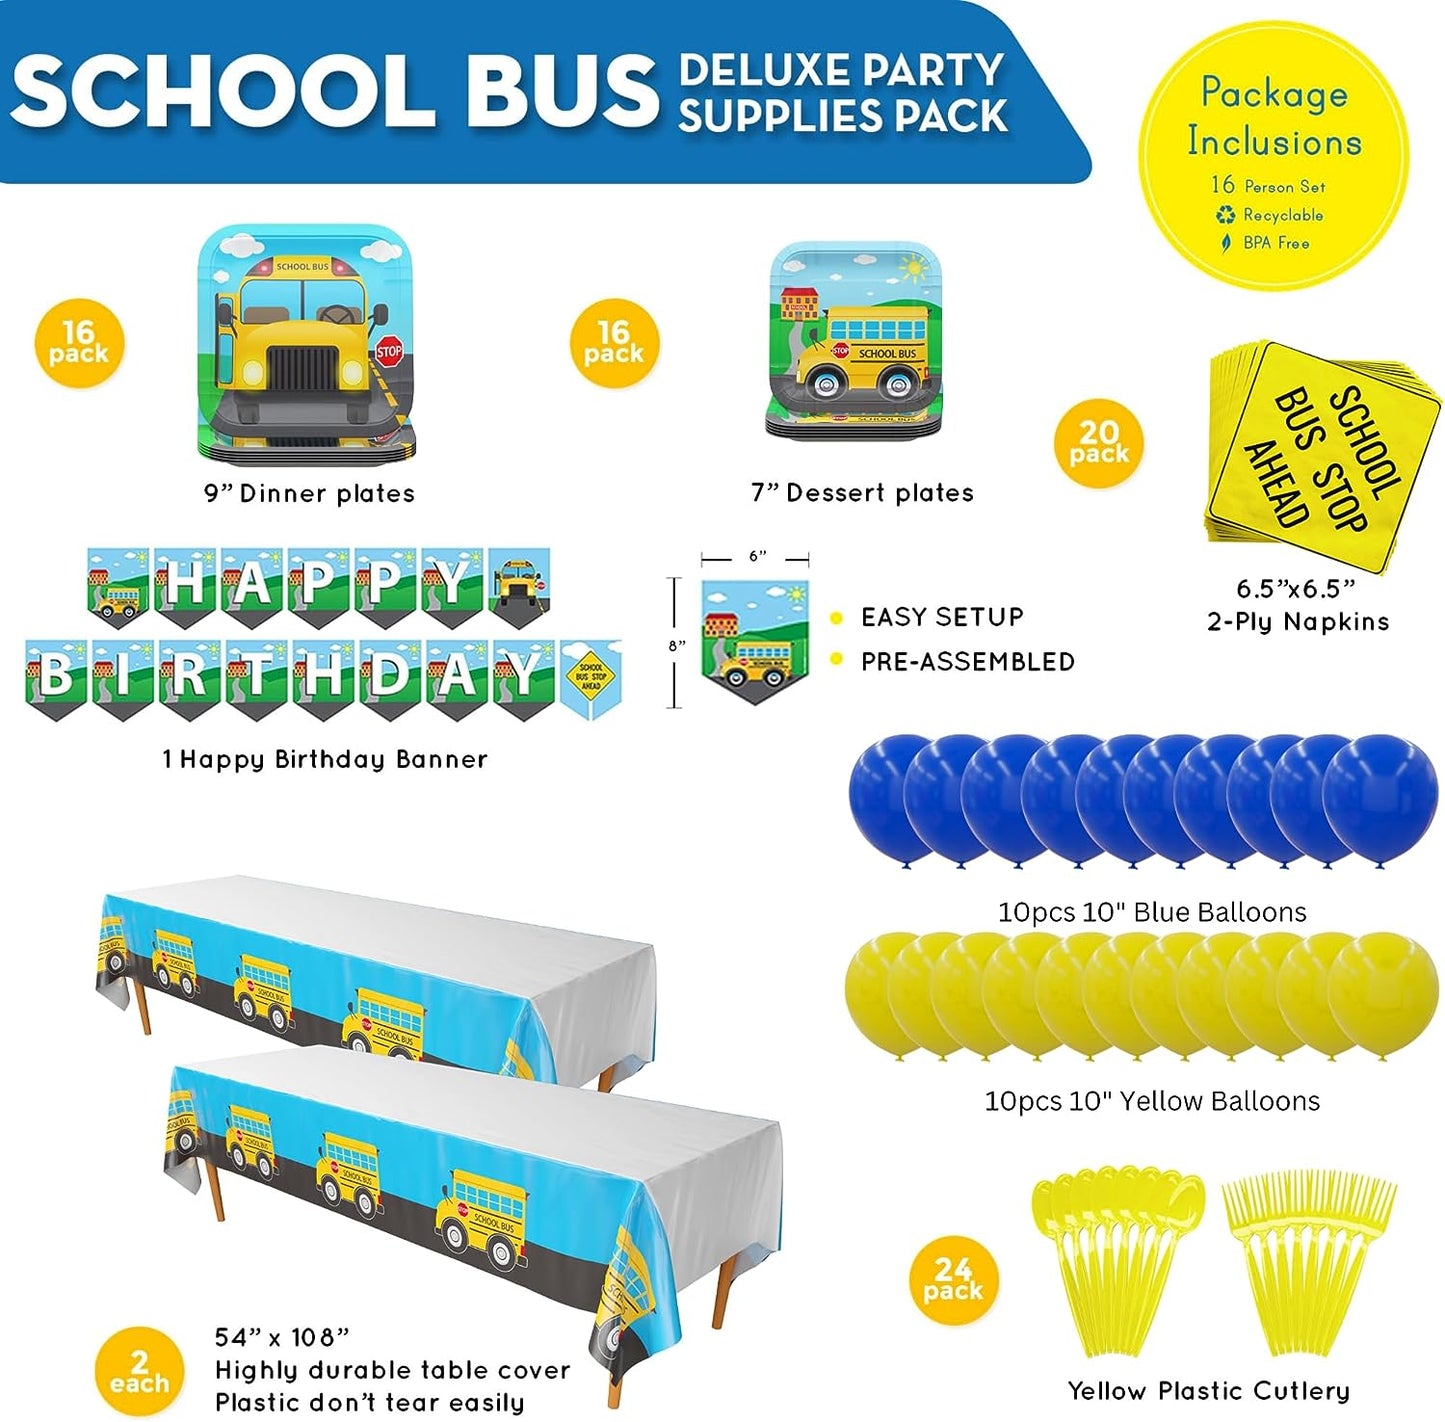 16 9-inch paper dinner plates, 16 7-inch paper dessert plates, 20 paper lunch napkins, 2 108” x 54” plastic table covers, 10 blue balloons, 10 yellow balloons (Note: Balloons recommended size is 10-inches, overblowing may cause them to pop.), 1 banner, 24 yellow plastic forks, and 24 yellow plastic spoons